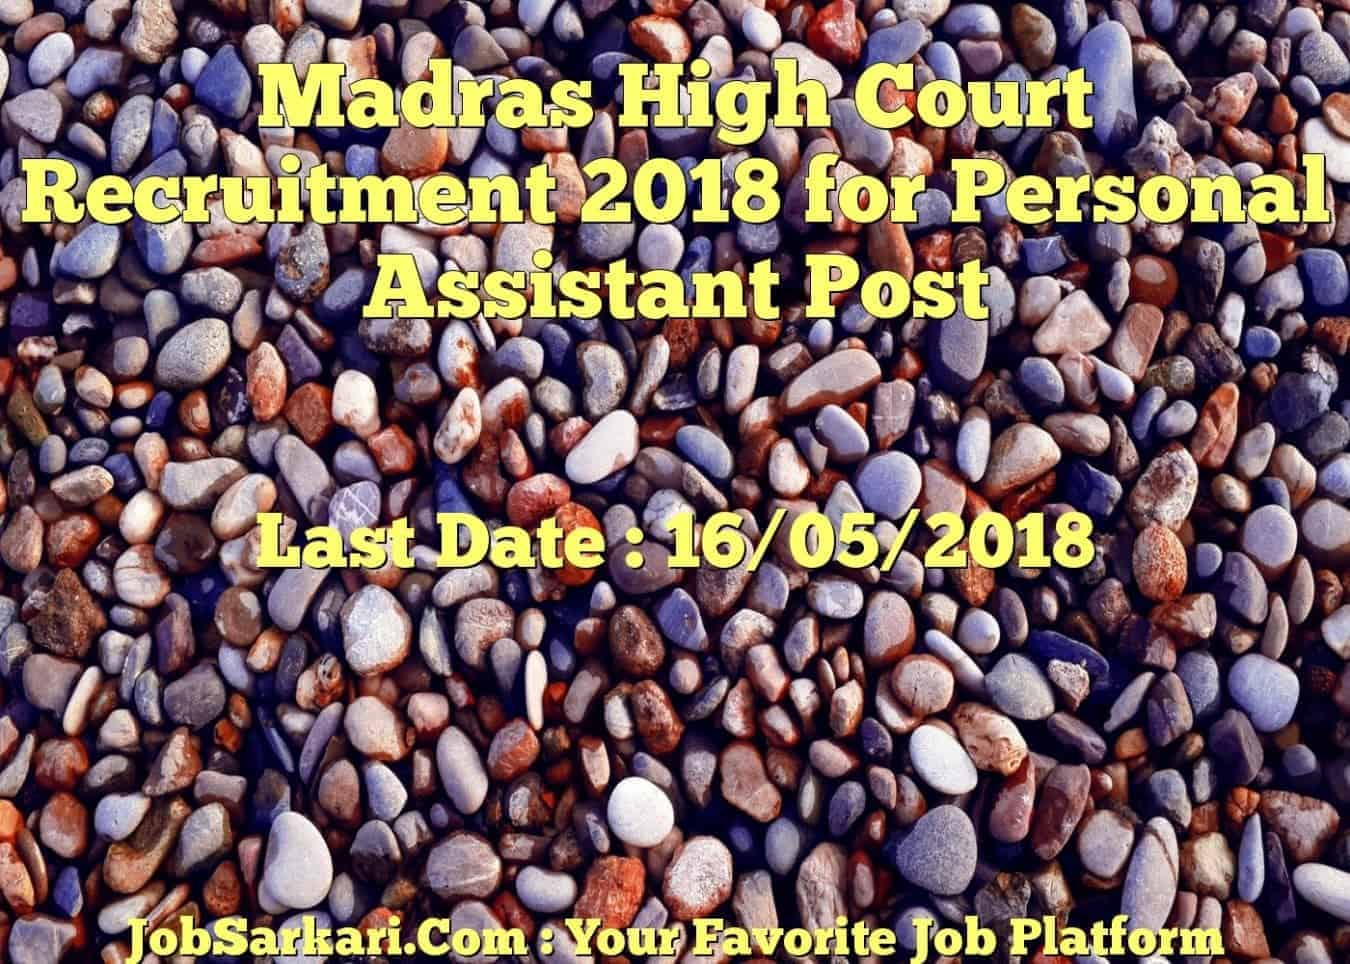 Madras High Court Recruitment 2018 for Personal Assistant Post